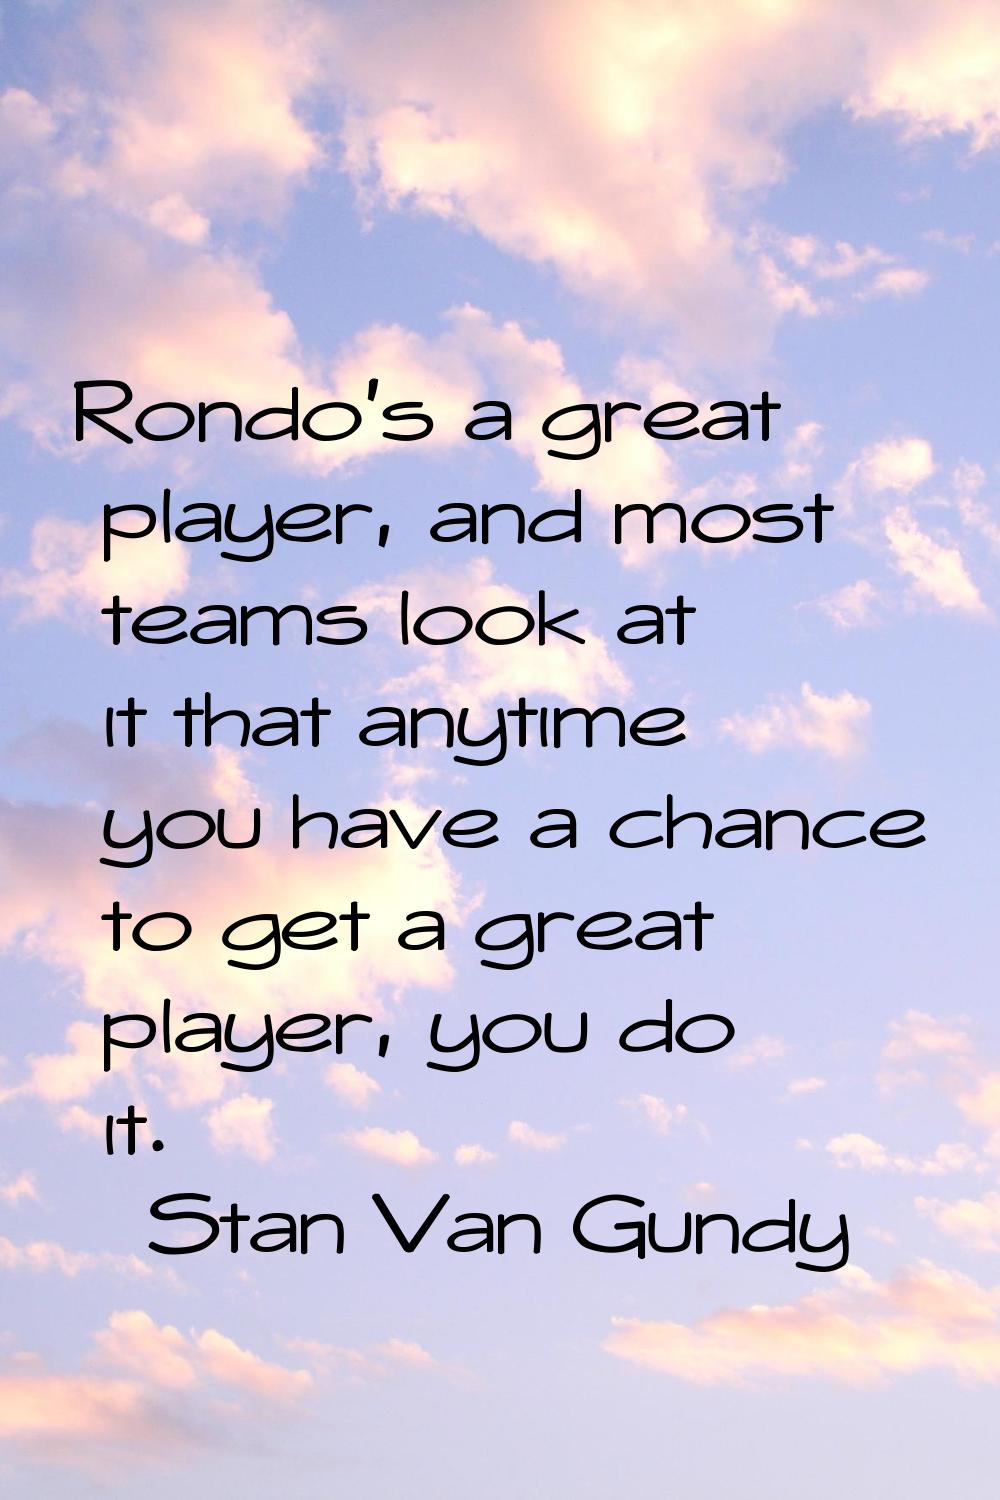 Rondo's a great player, and most teams look at it that anytime you have a chance to get a great pla